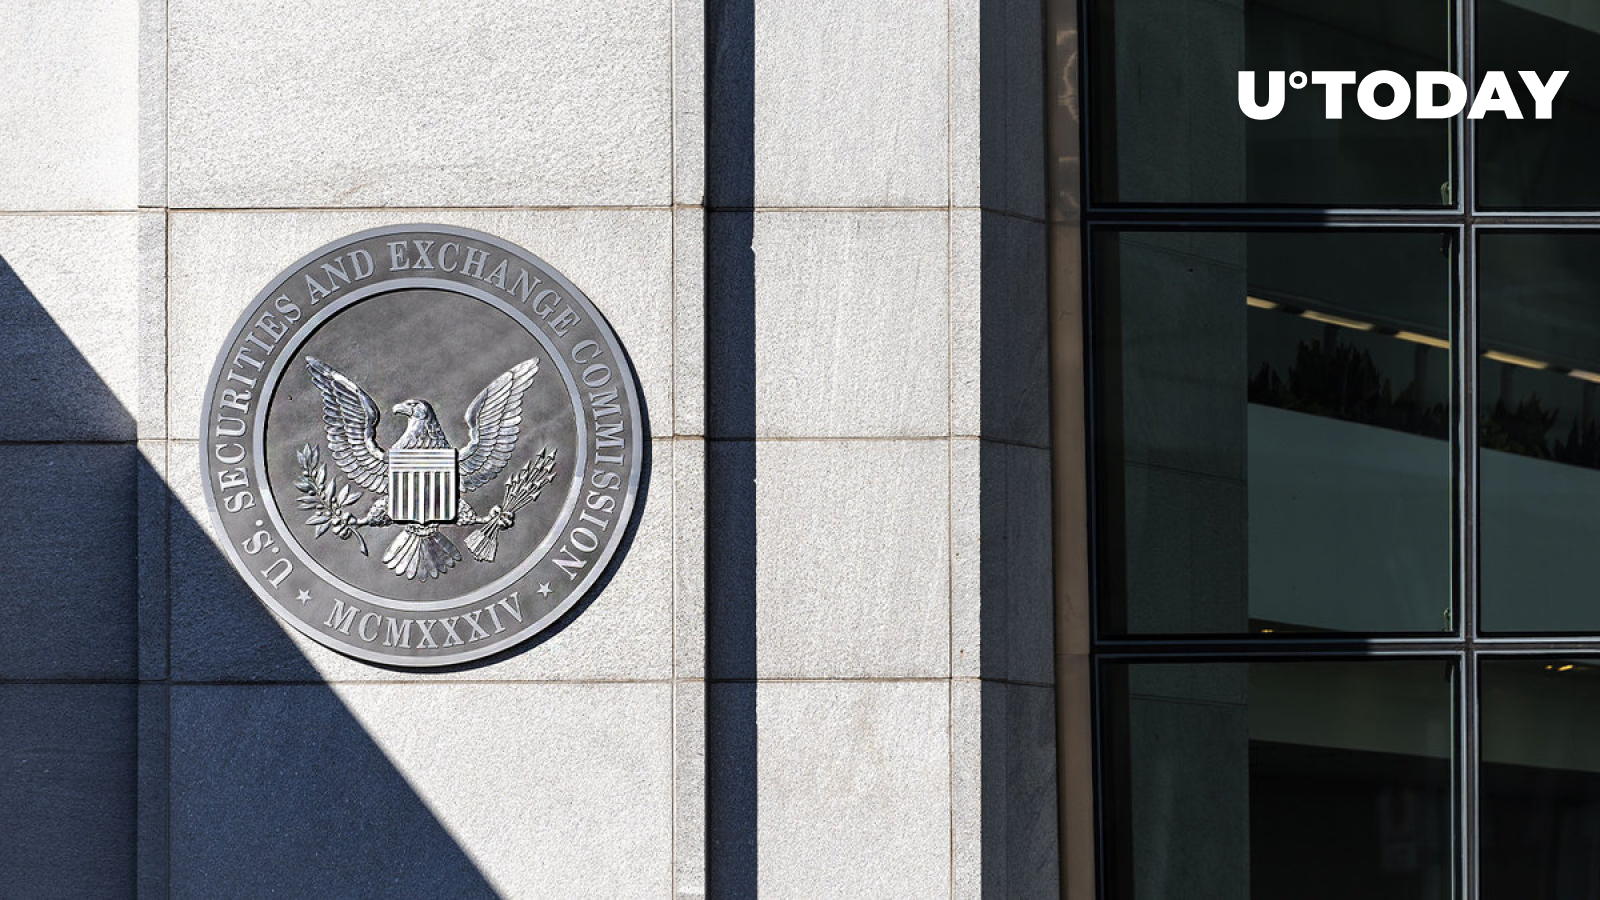 SEC’s Hostile Approach to Crypto Space Made Investors Lose Billions of USD: Senate Banking Committee